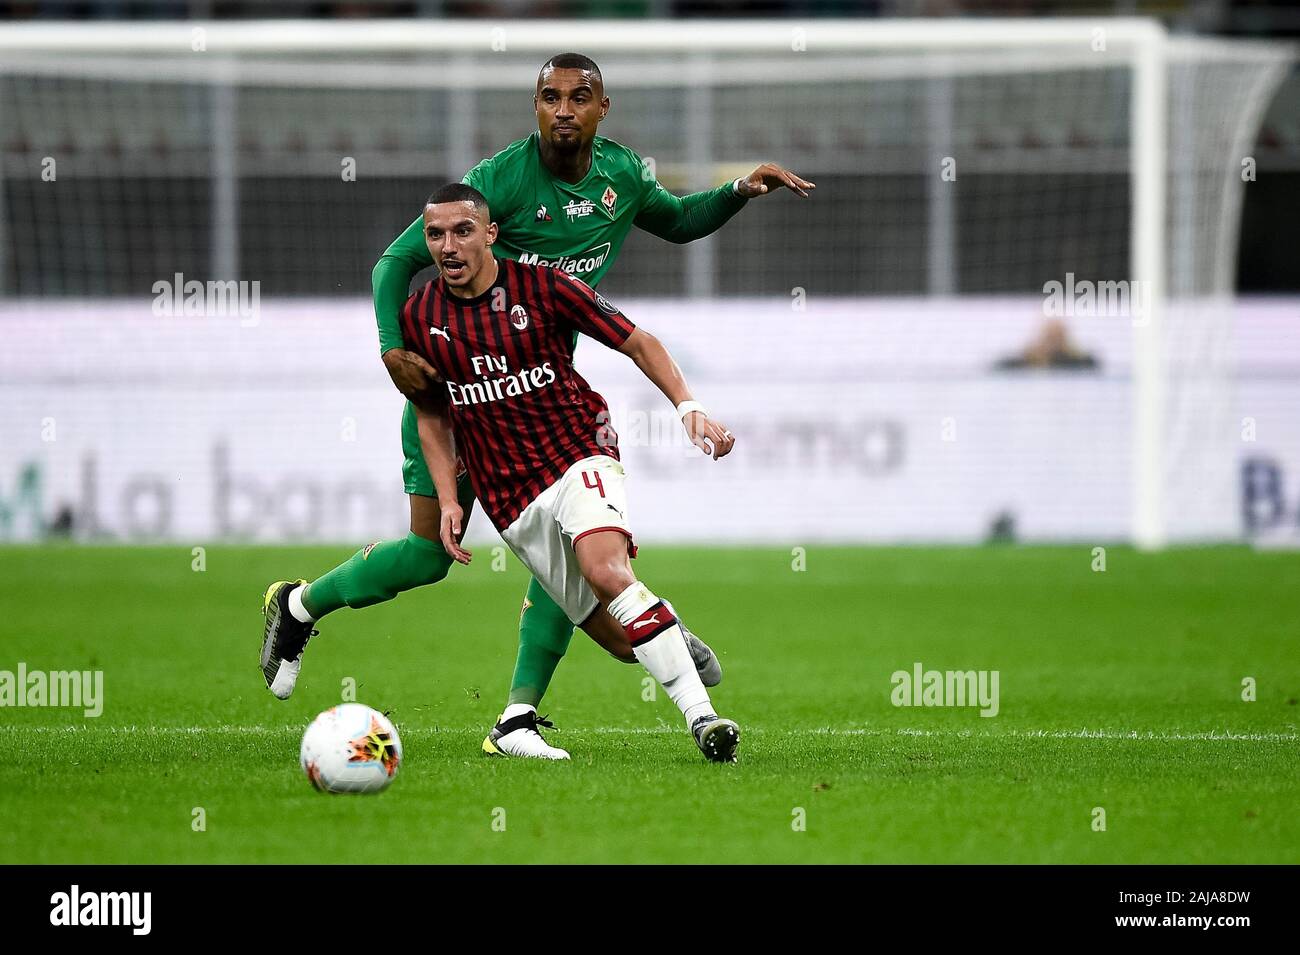 Milan, Italy. 29 September, 2019: Ismael Bennacer of AC Milan competes for the ball with Kevin-Prince Boateng of ACF Fiorentina during the Serie A football match between AC Milan and ACF Fiorentina. ACF Fiorentina won 3-1 over AC Milan. Credit: Nicolò Campo/Alamy Live News Stock Photo